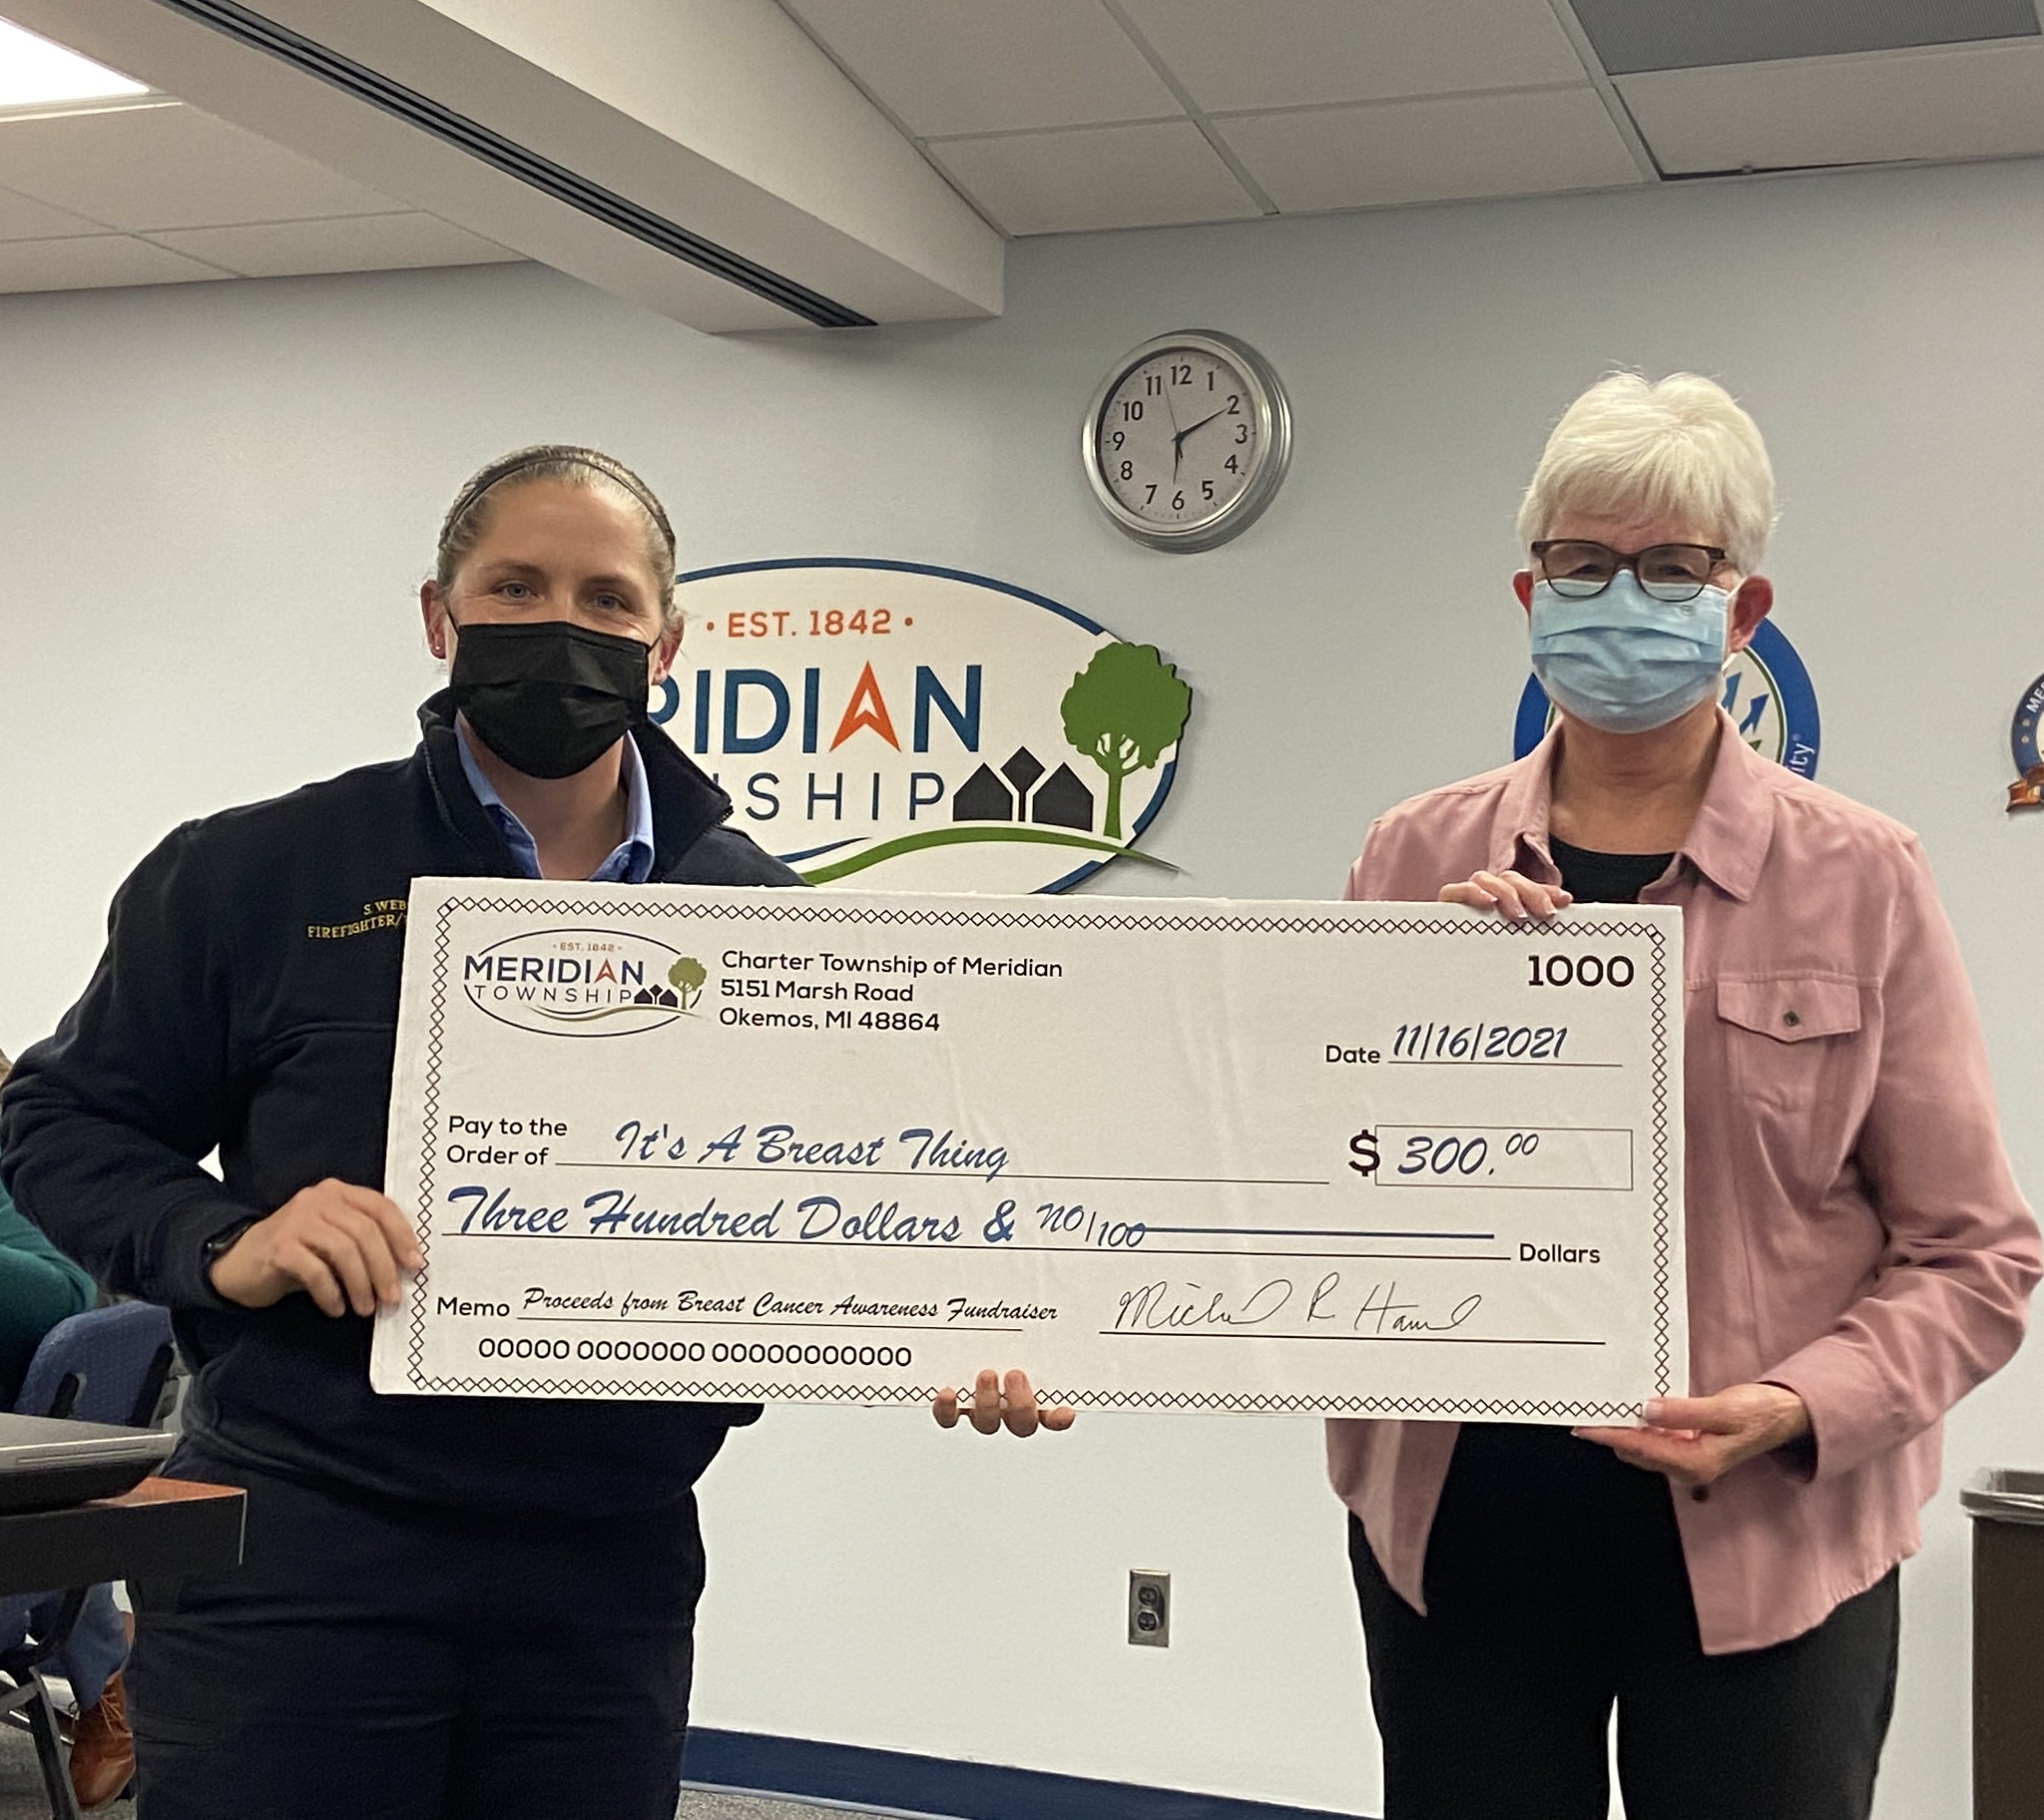 Meridian Township Fire Department Awards $300 To 'It's A Breast Thing' Charity